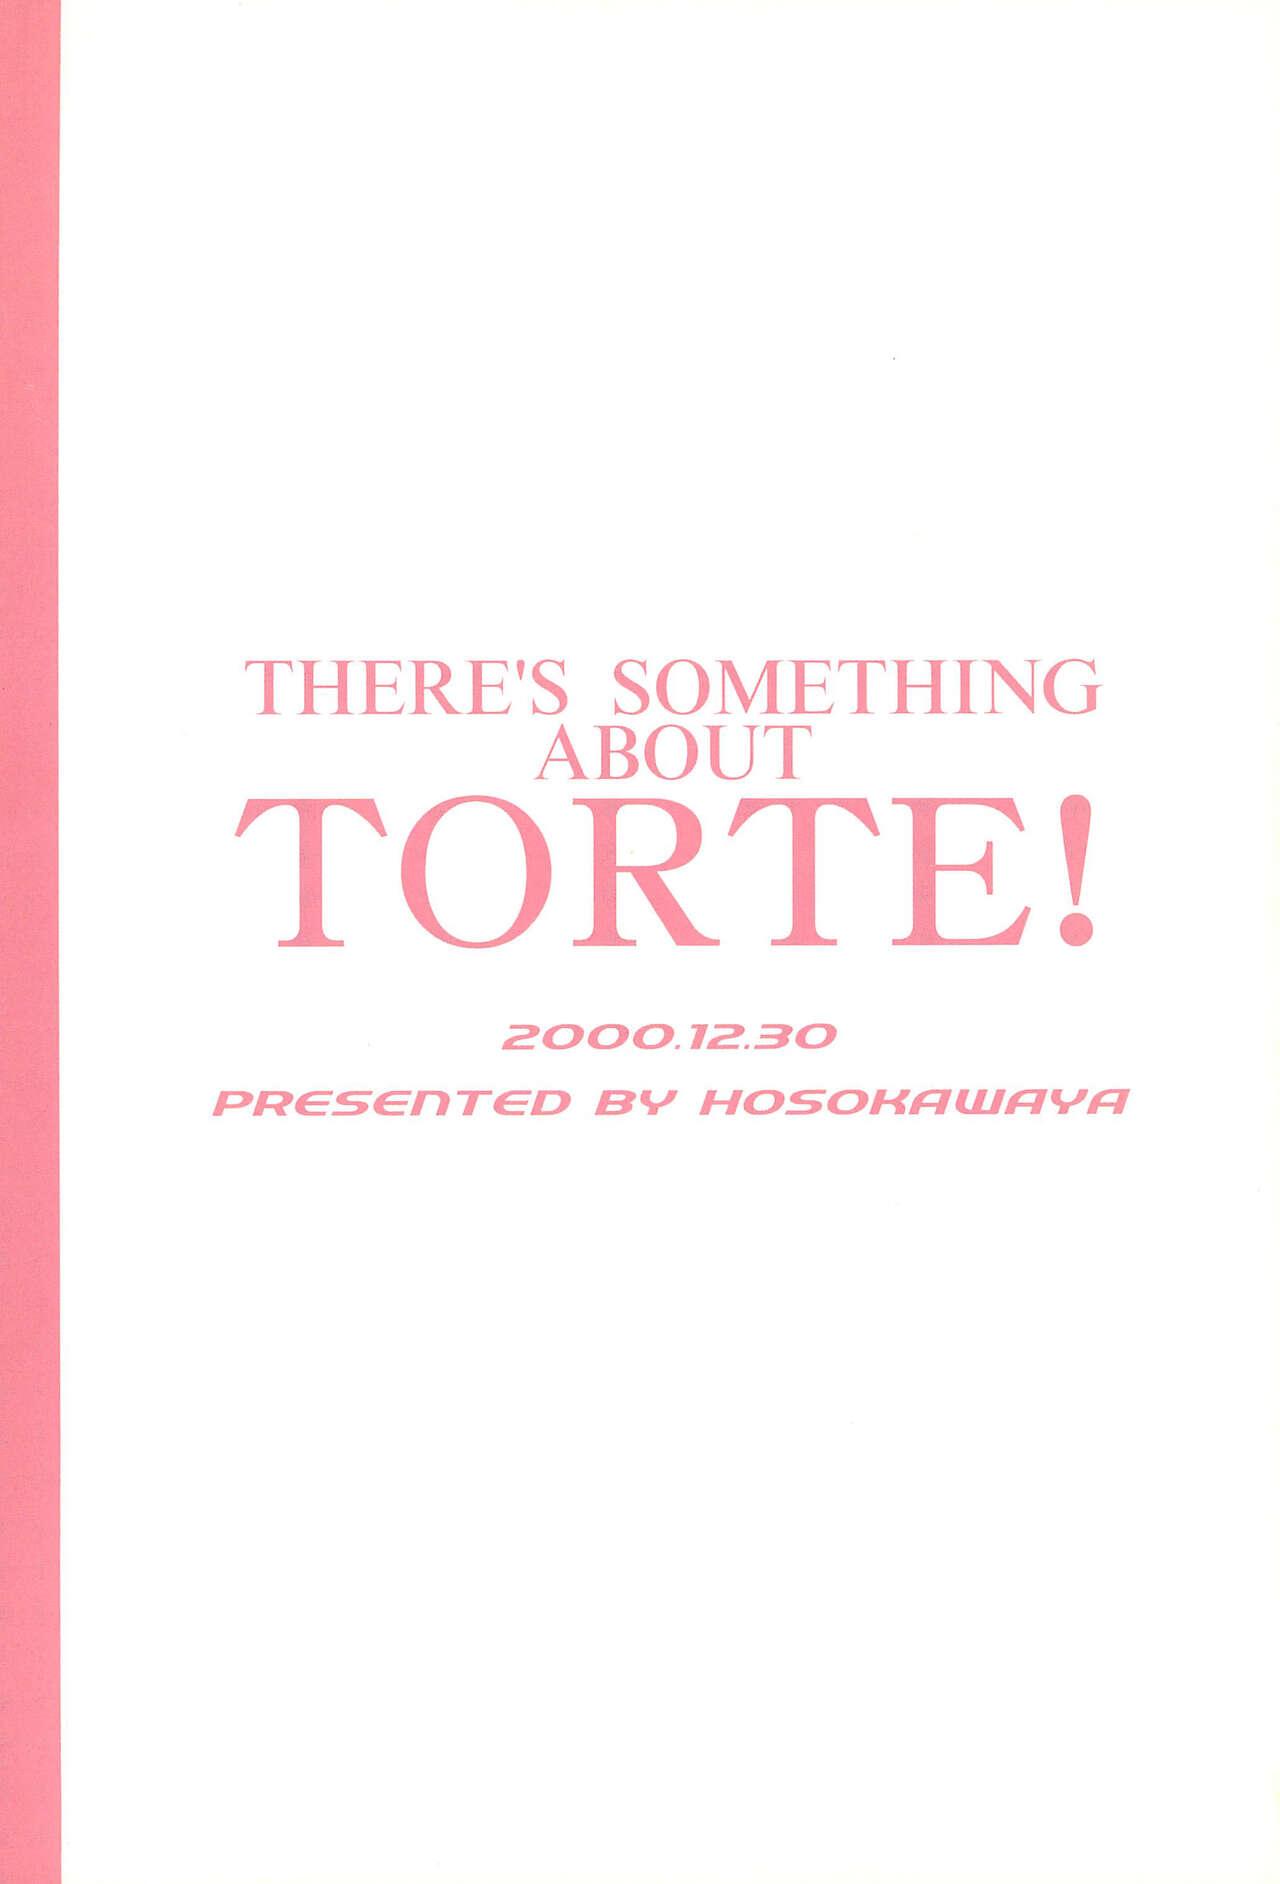 THERE’S SOMETHING ABOUT TORTE! 35